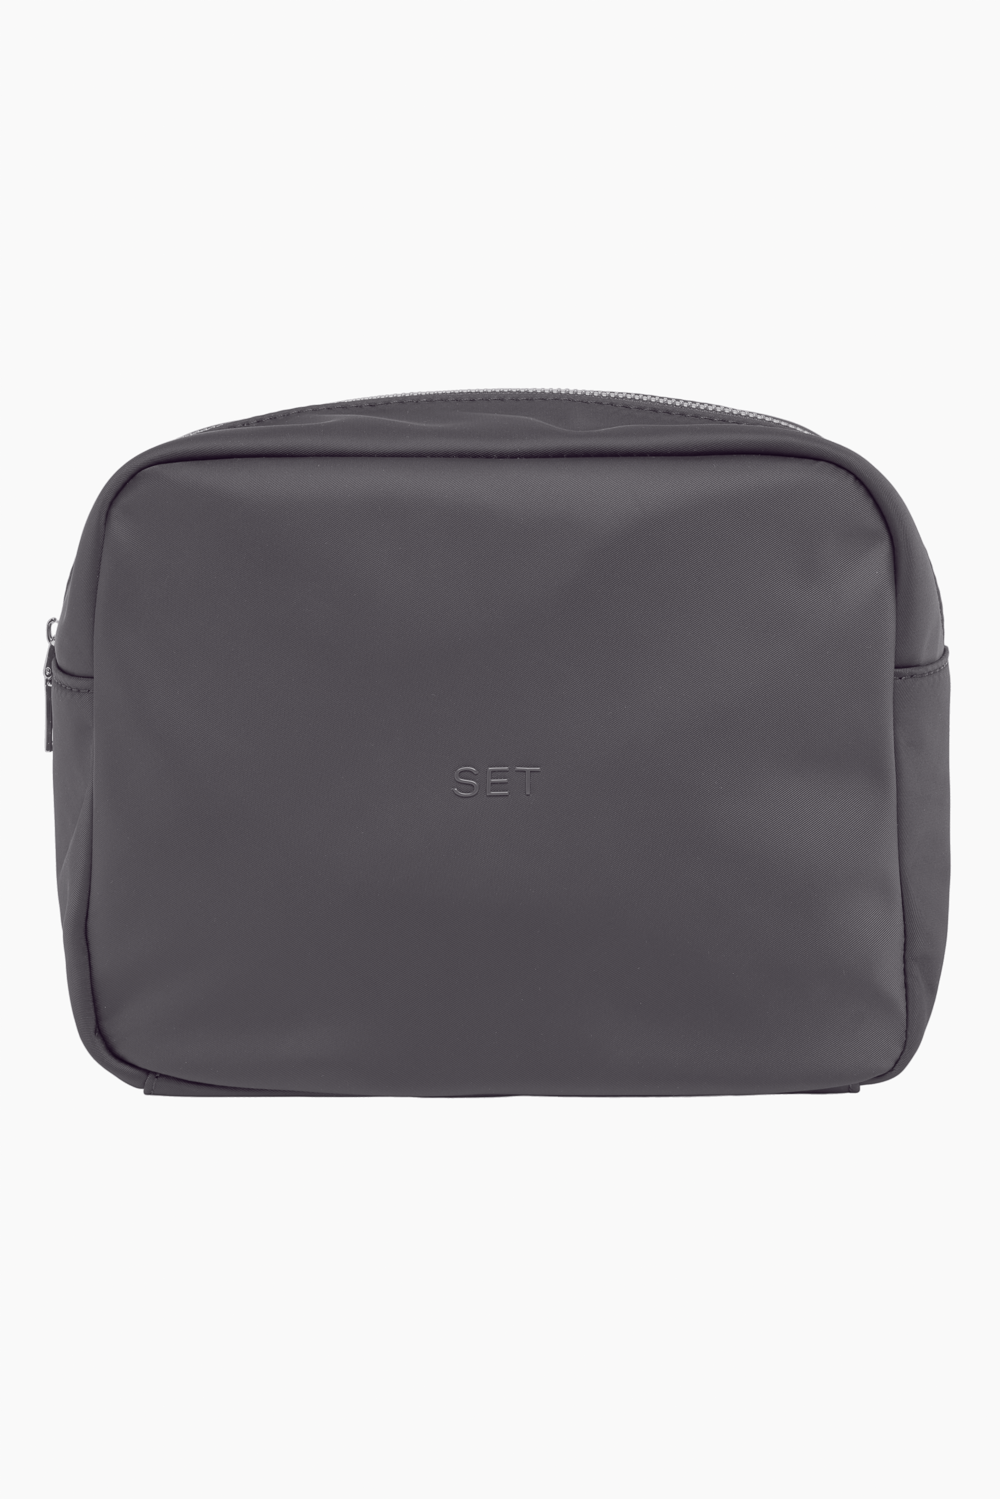 EVERYTHING BAG - GRAPHITE Featured Image